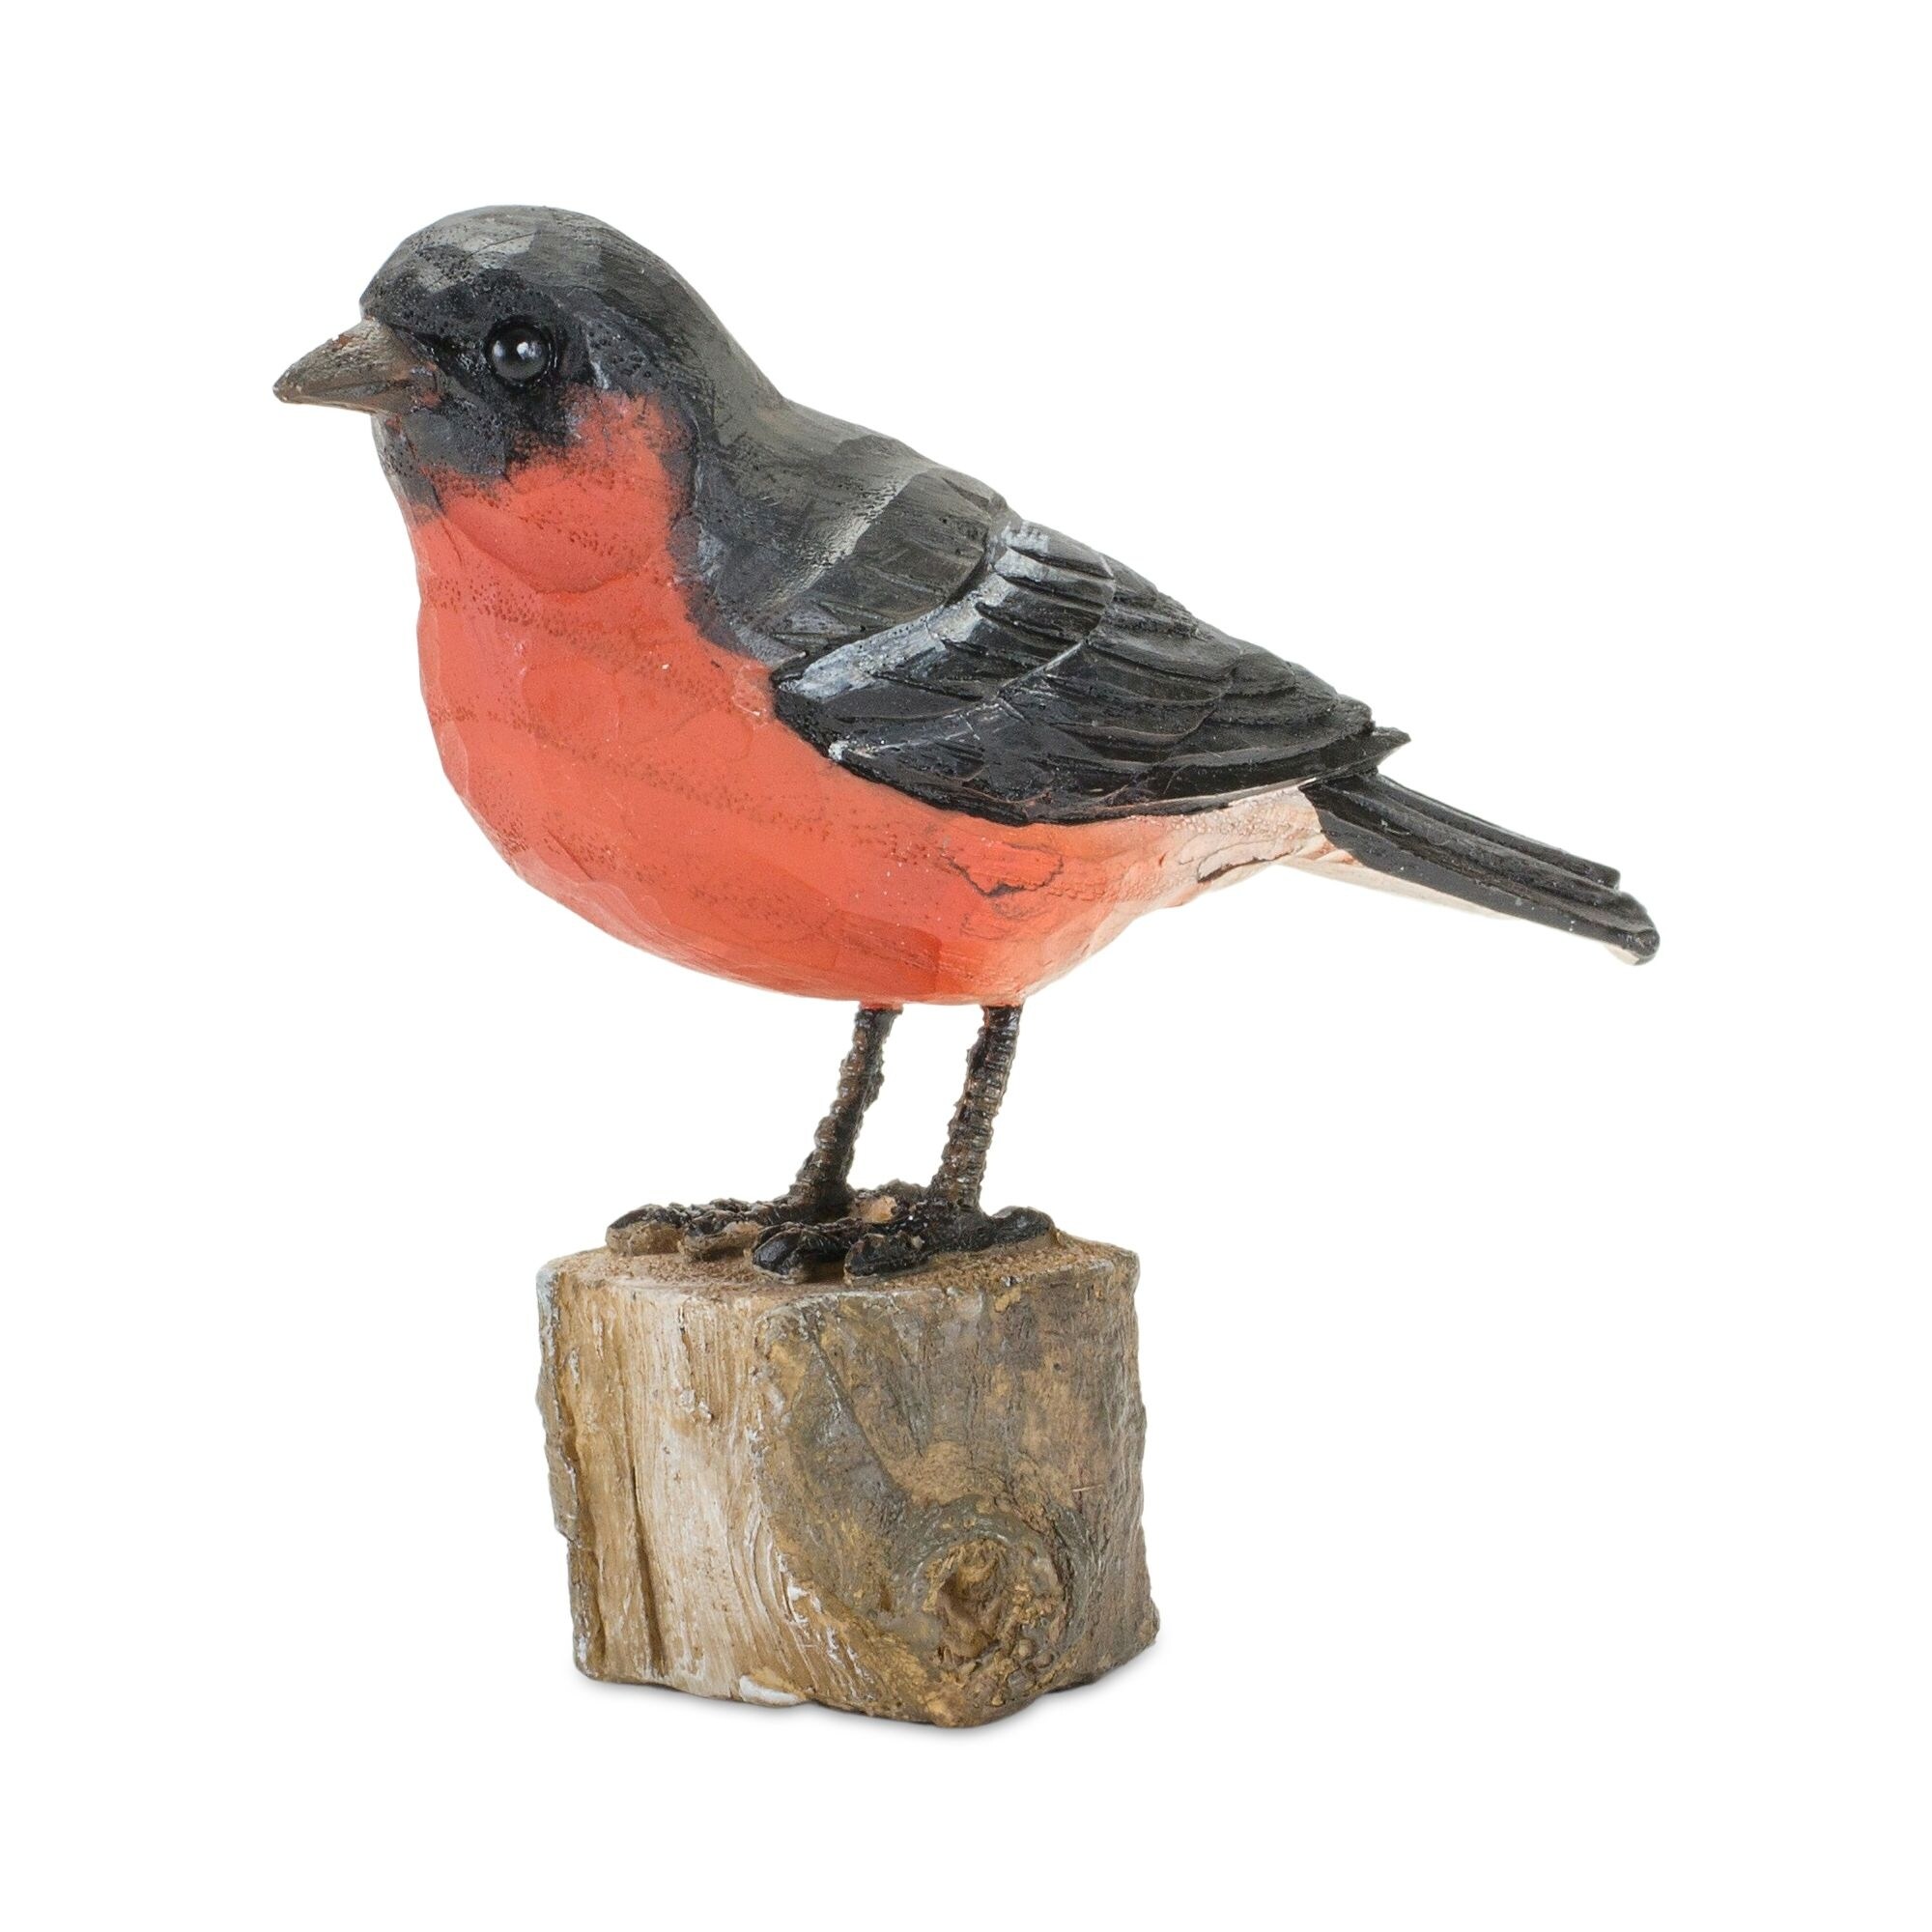 Set of 2 Red and Black Bird on Stump Tabletop Figurines 4.25"